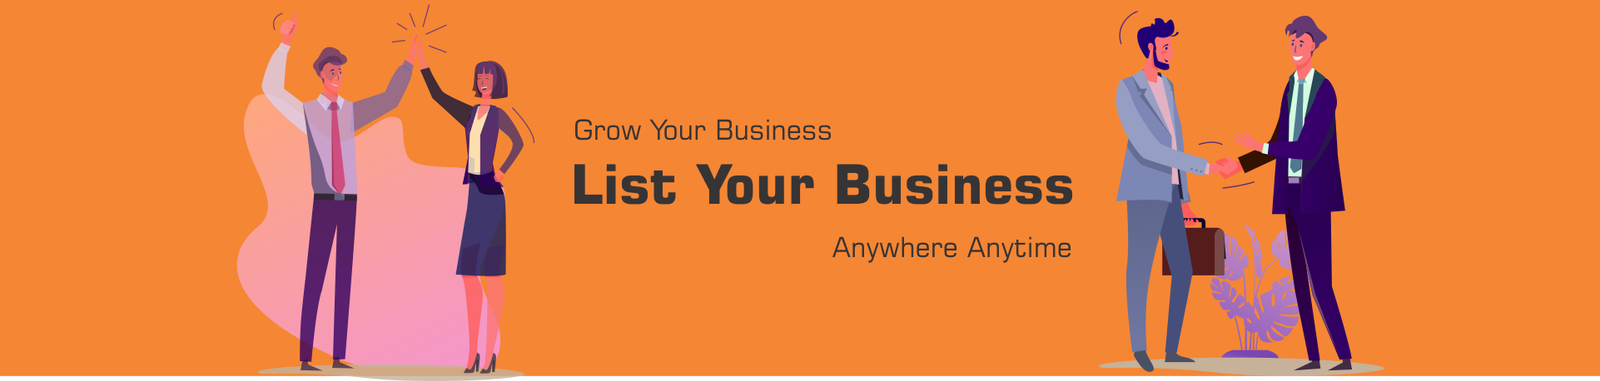 List Your Business_Solution24